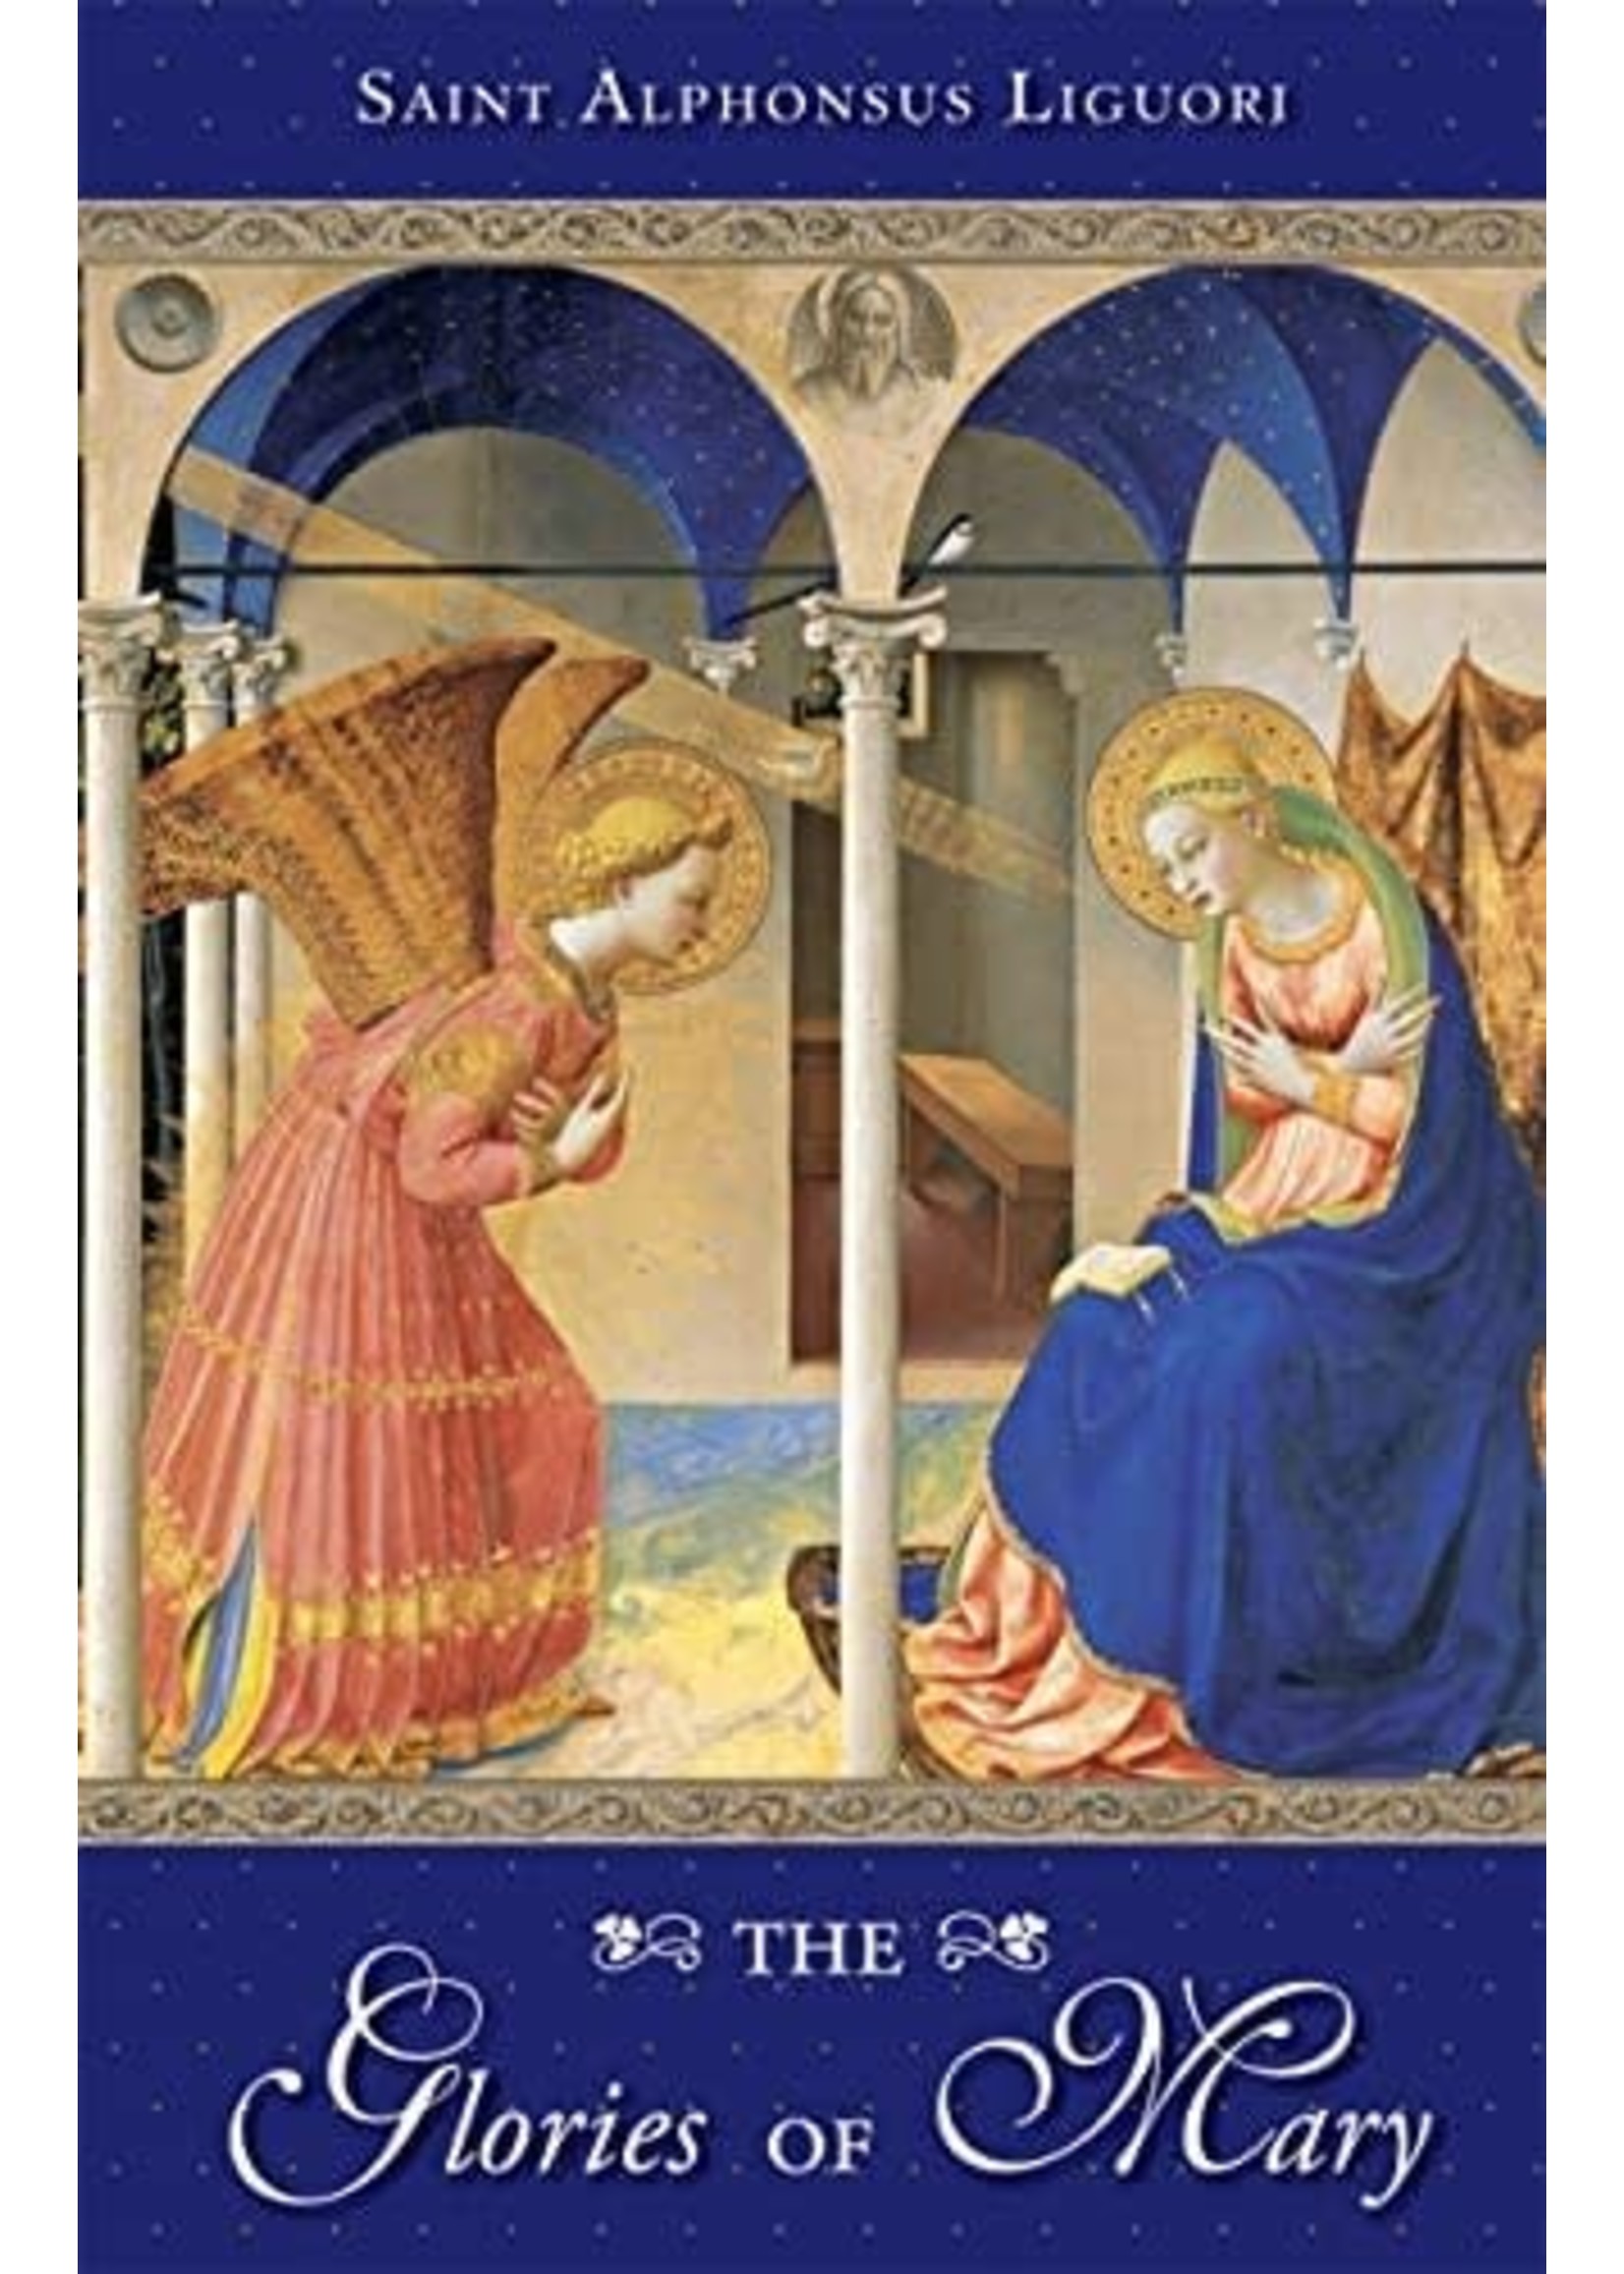 TAN Books The Glories of Mary